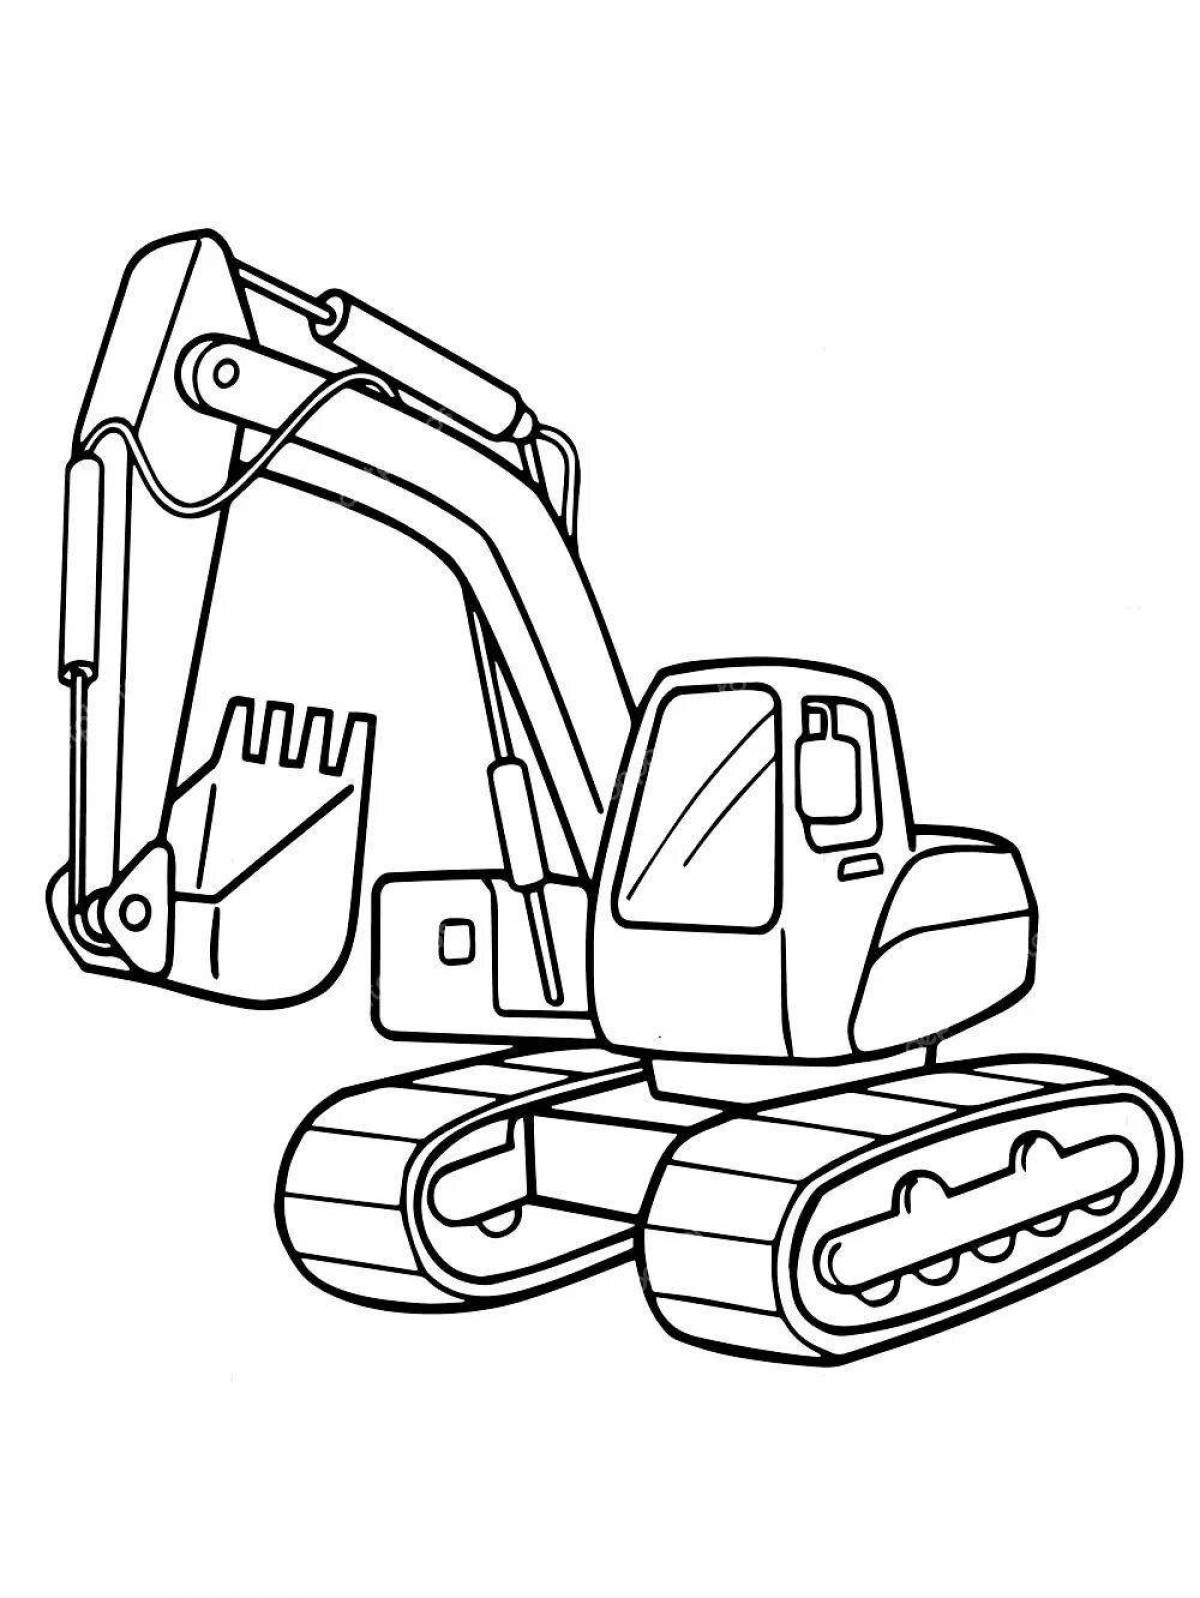 Inviting excavator coloring book for 2-3 year olds